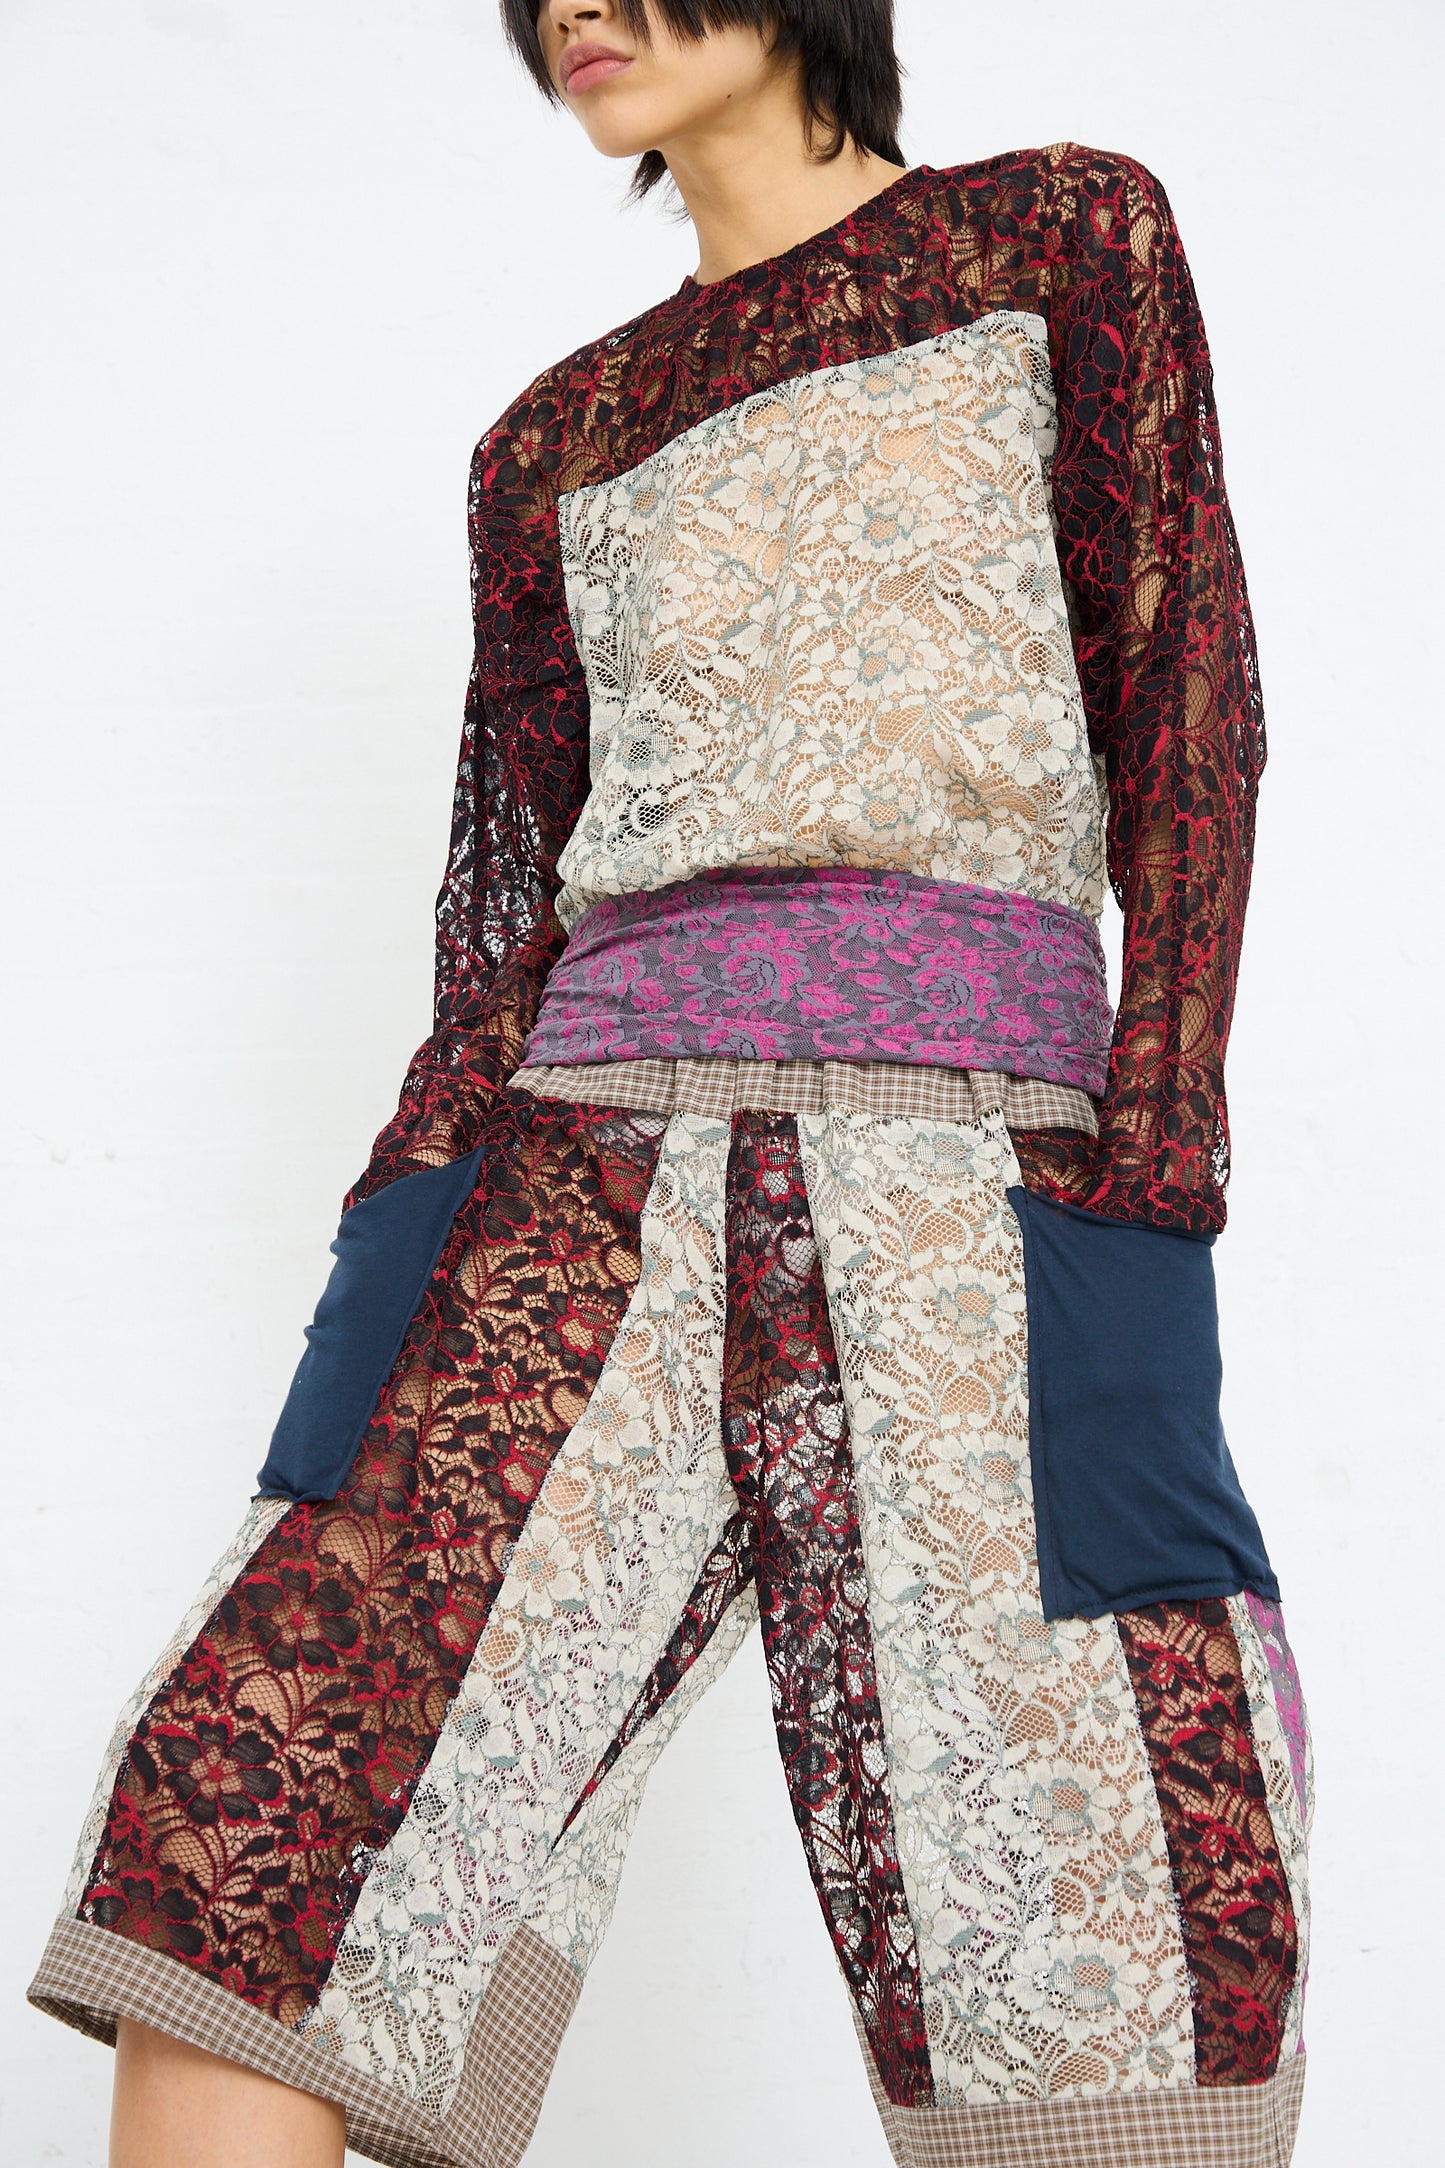 A person wearing an eclectic outfit featuring mixed patterns and textures, including a SC103 Lace Ritual Top in Thrash.